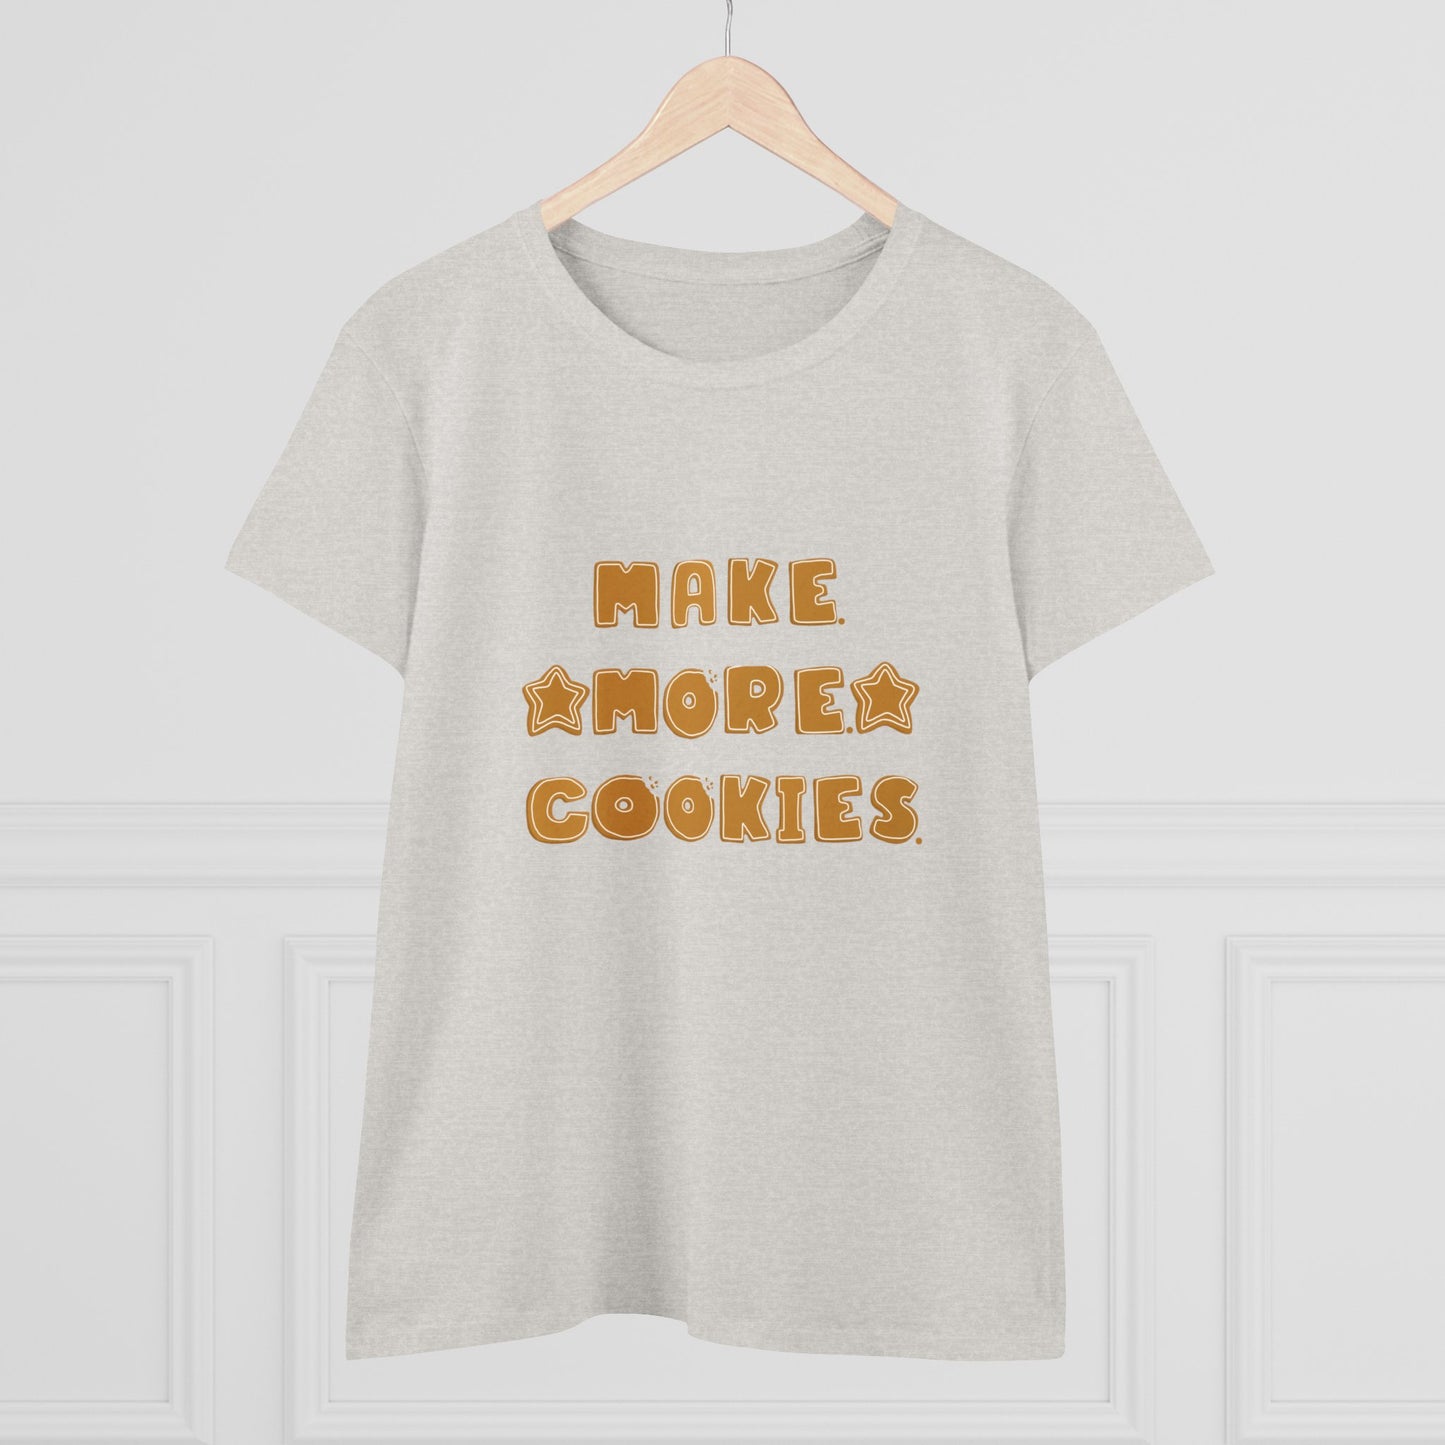 Hobby, Interests, Baking, Cooking, Make More Cookies, Star, Things, Food- Adult, Semi-fitted, Shirt